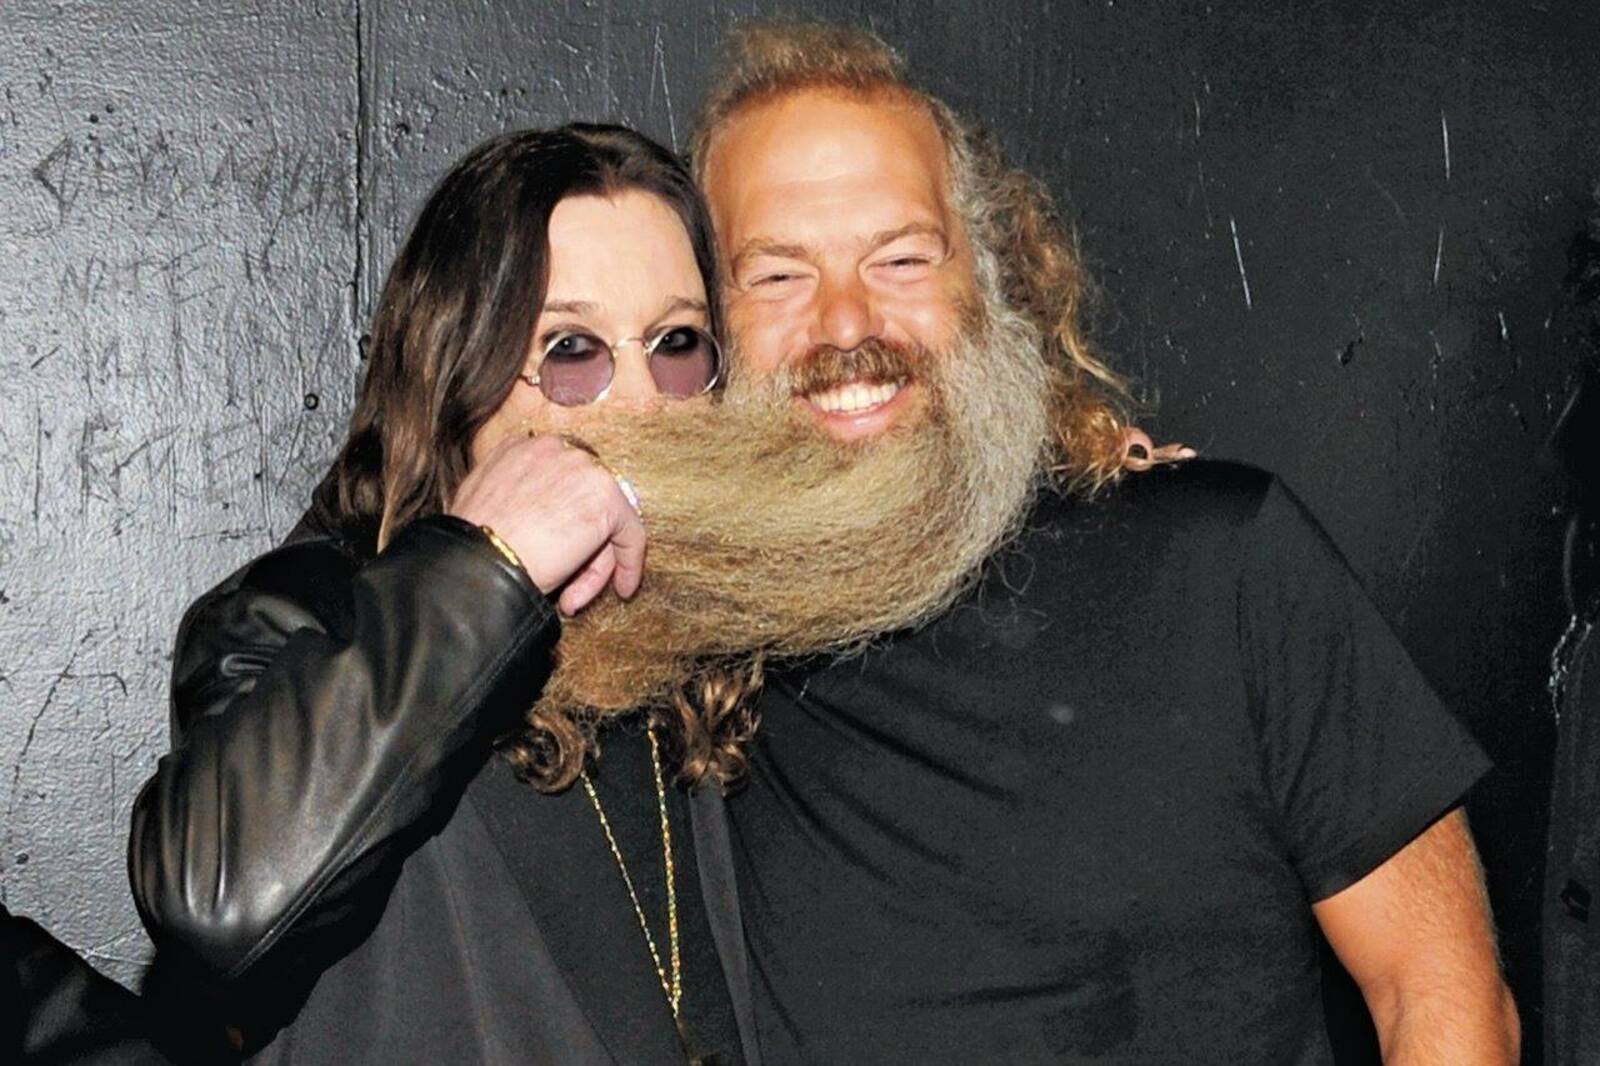 The Top 10 Songs That Rick Rubin Listed As His Favorites